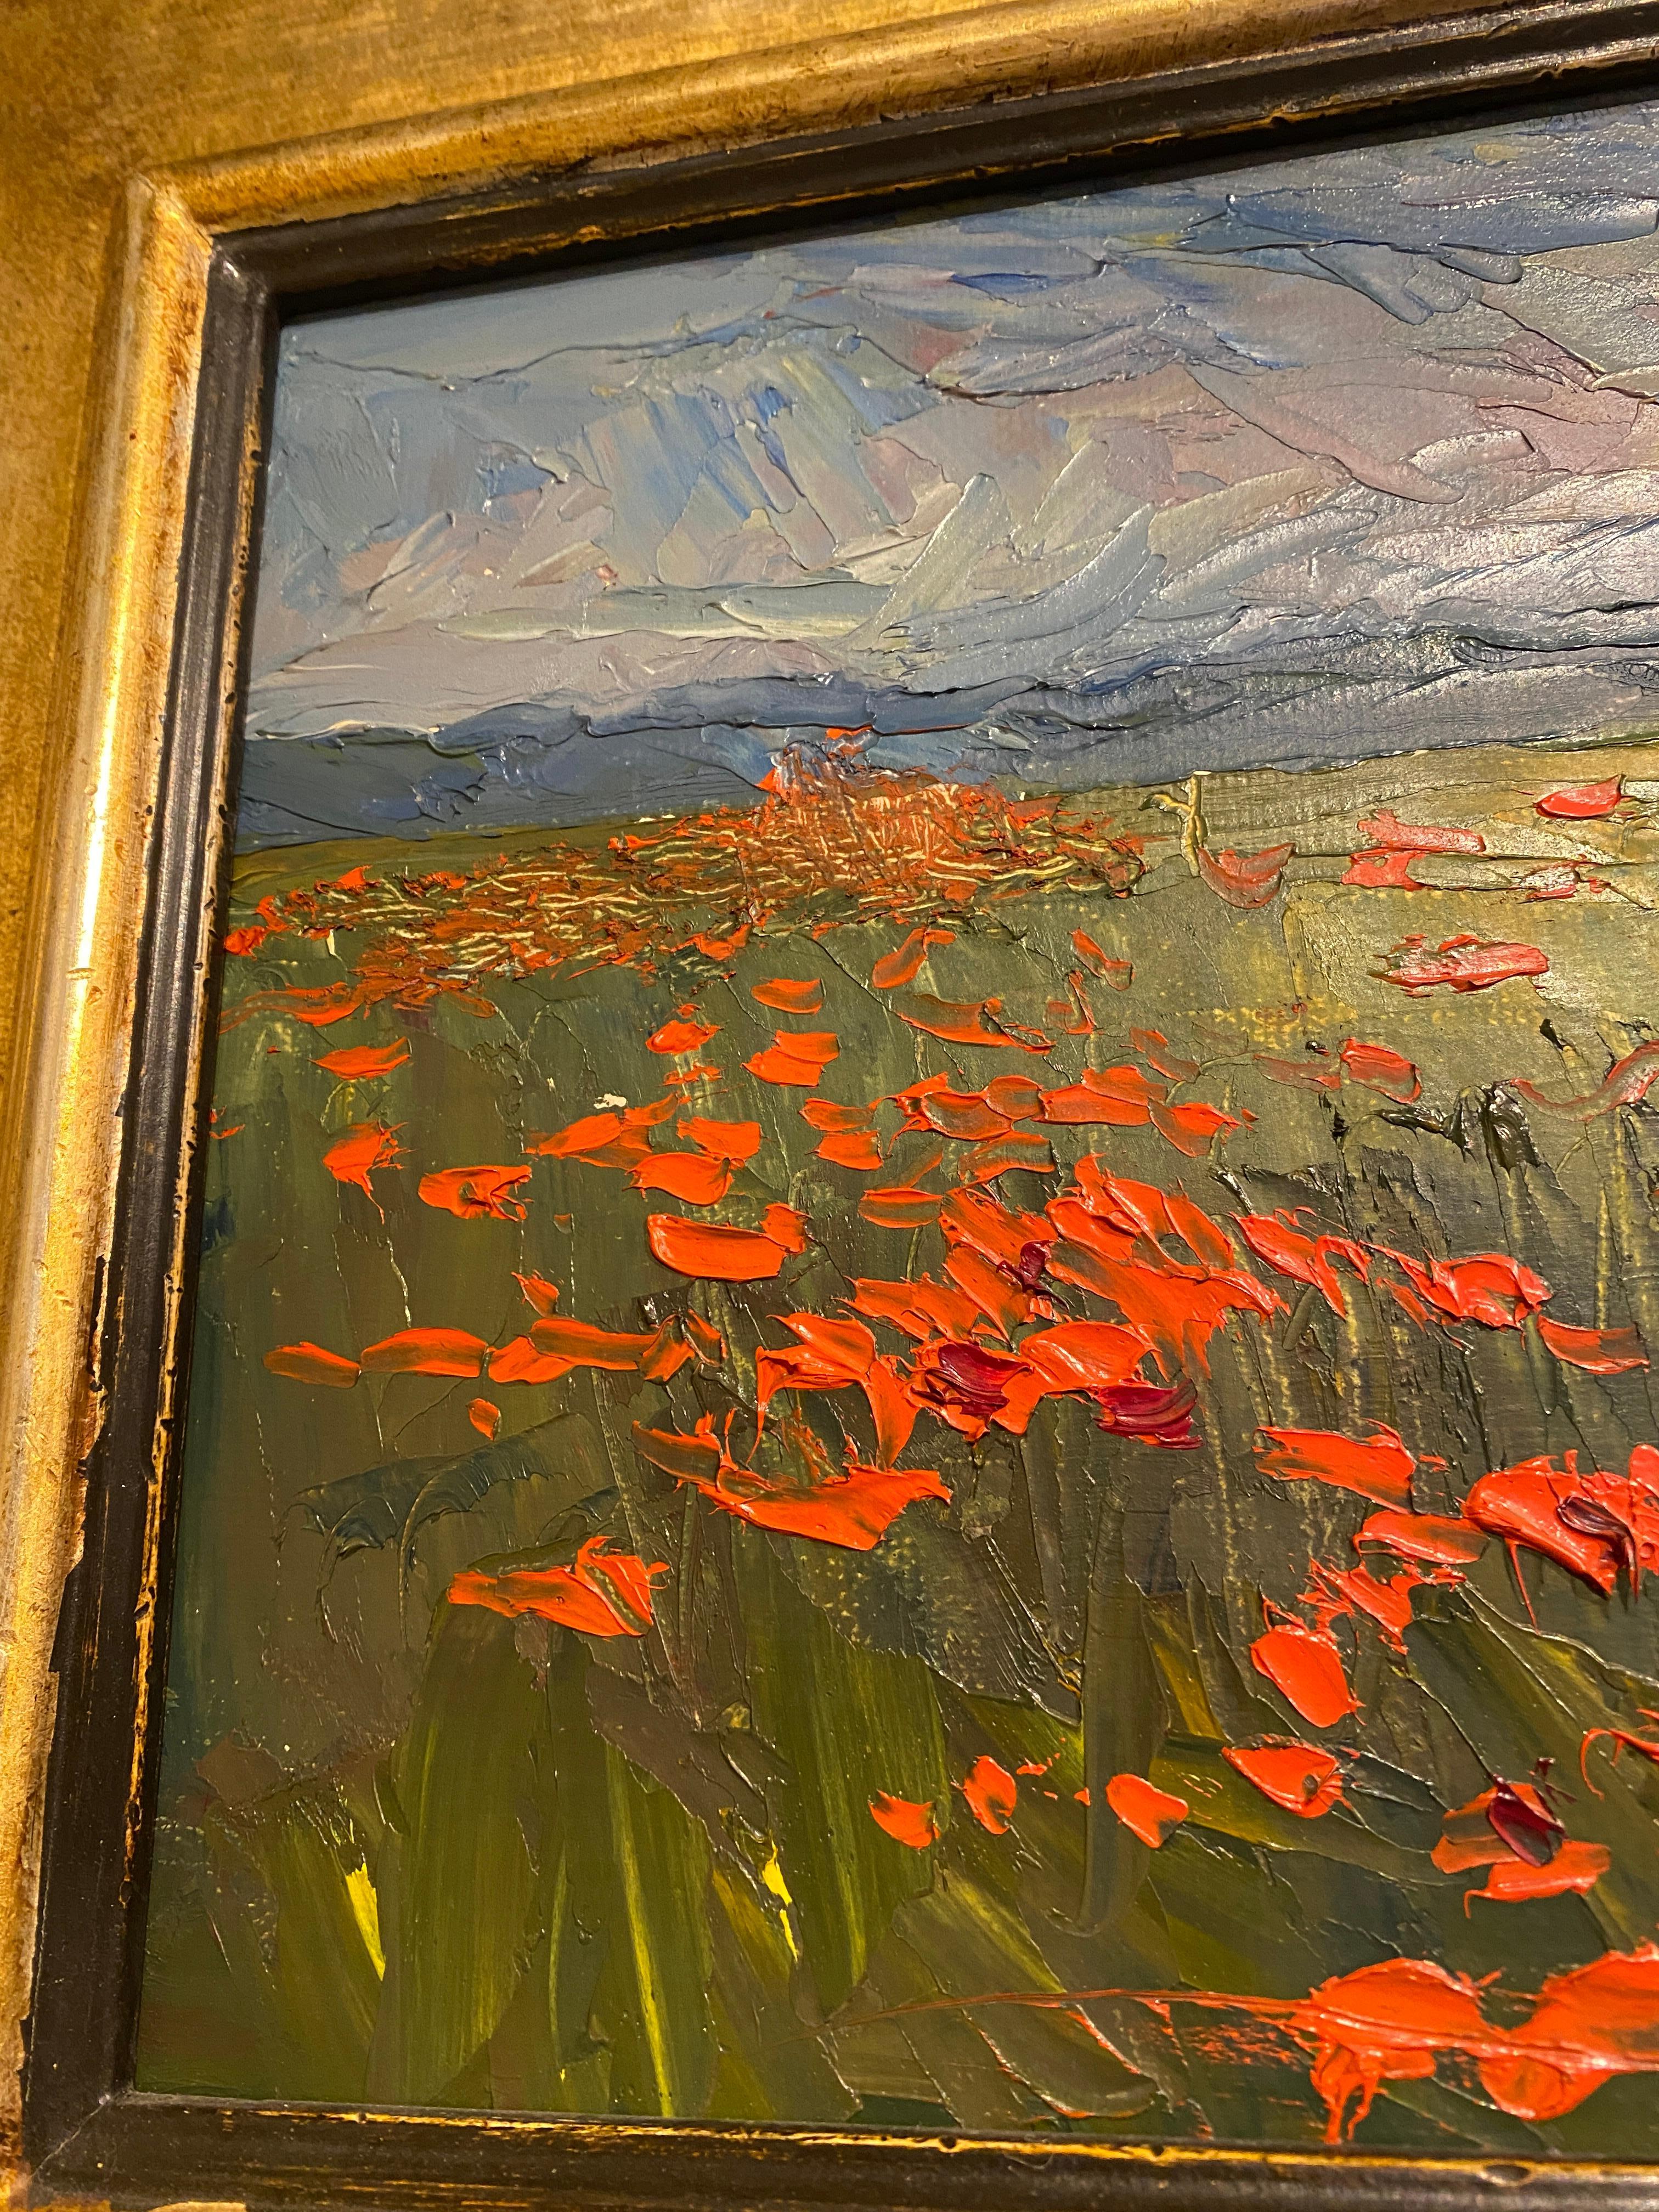 Painted en plein air in Tuscany; a vast field of poppies in Torre del Lago, Italy, Nelson White confidently lays thick dabs of color onto his panel, creating an almost abstract landscape painting. 

Framed in a custom, Italian, handmade gold leaf